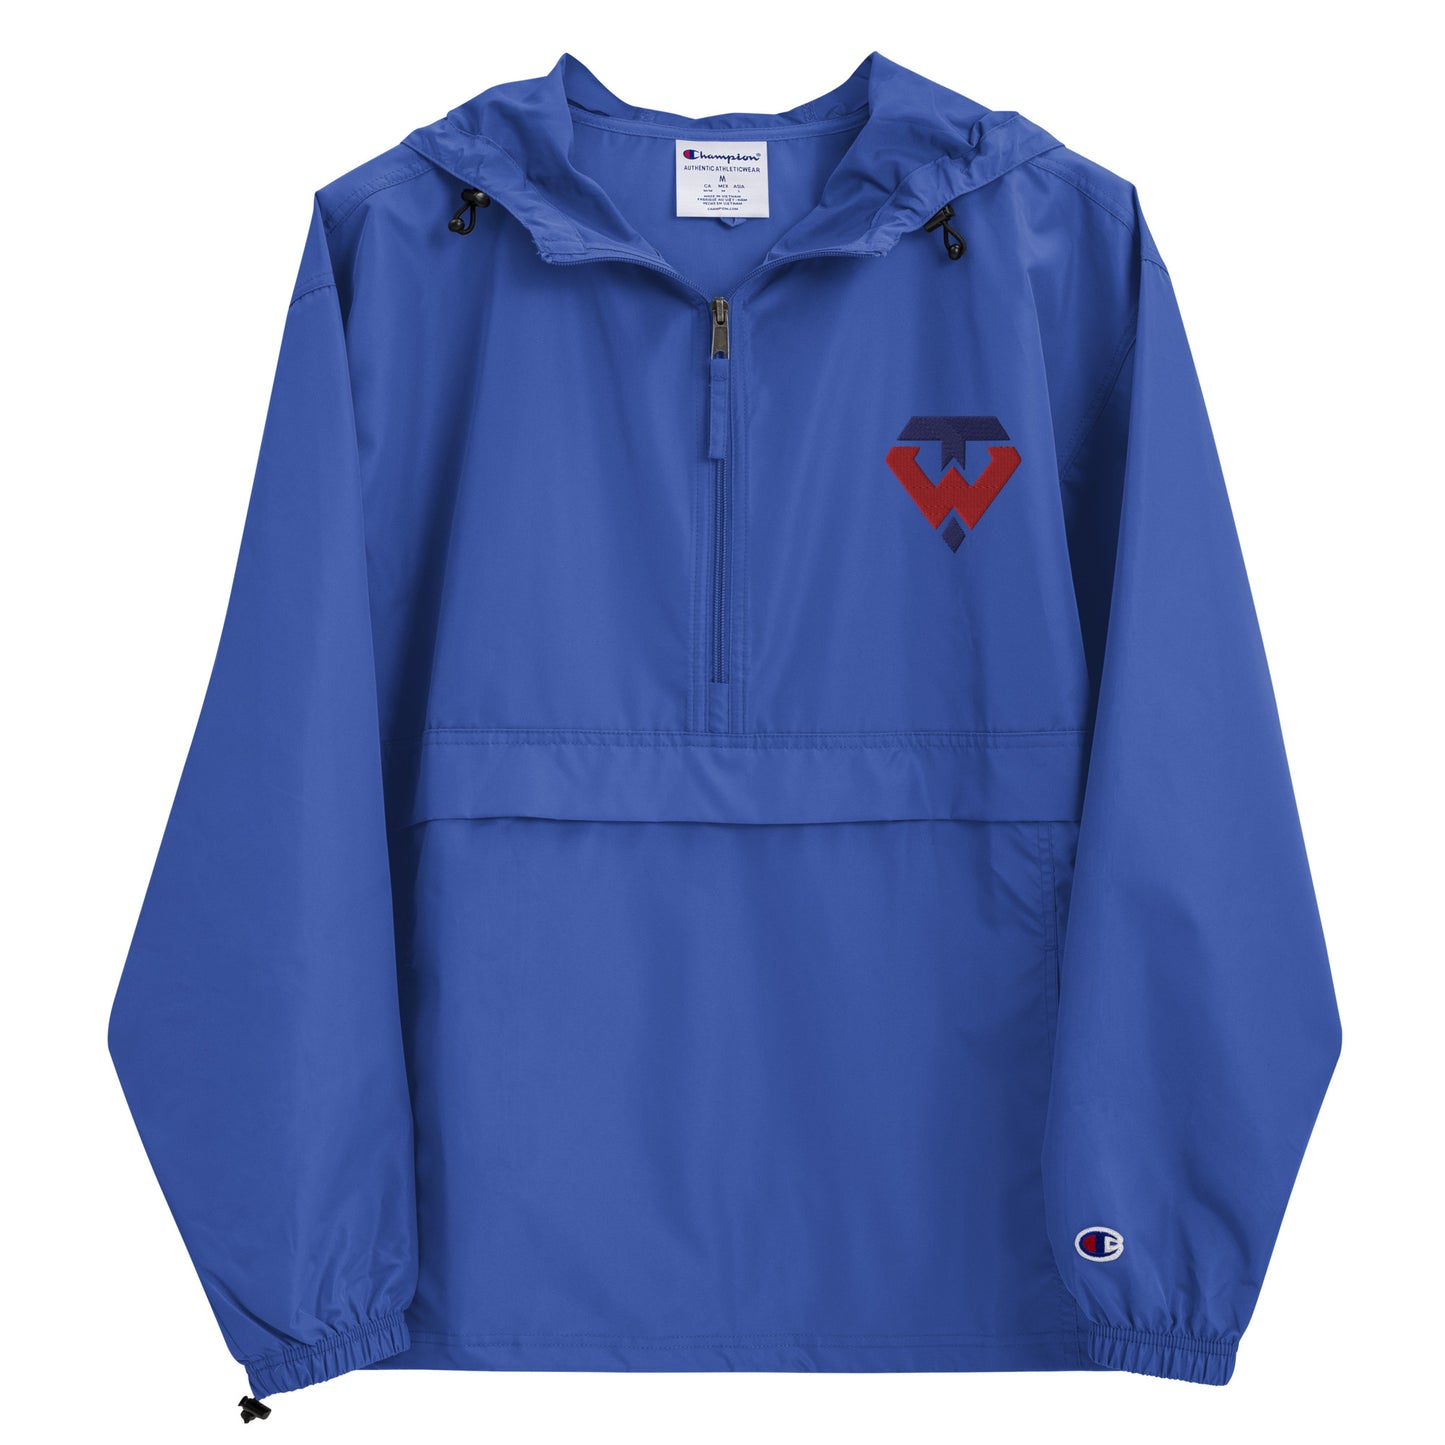 Tampa Warriors TW Seal Embroidered Champion Jacket